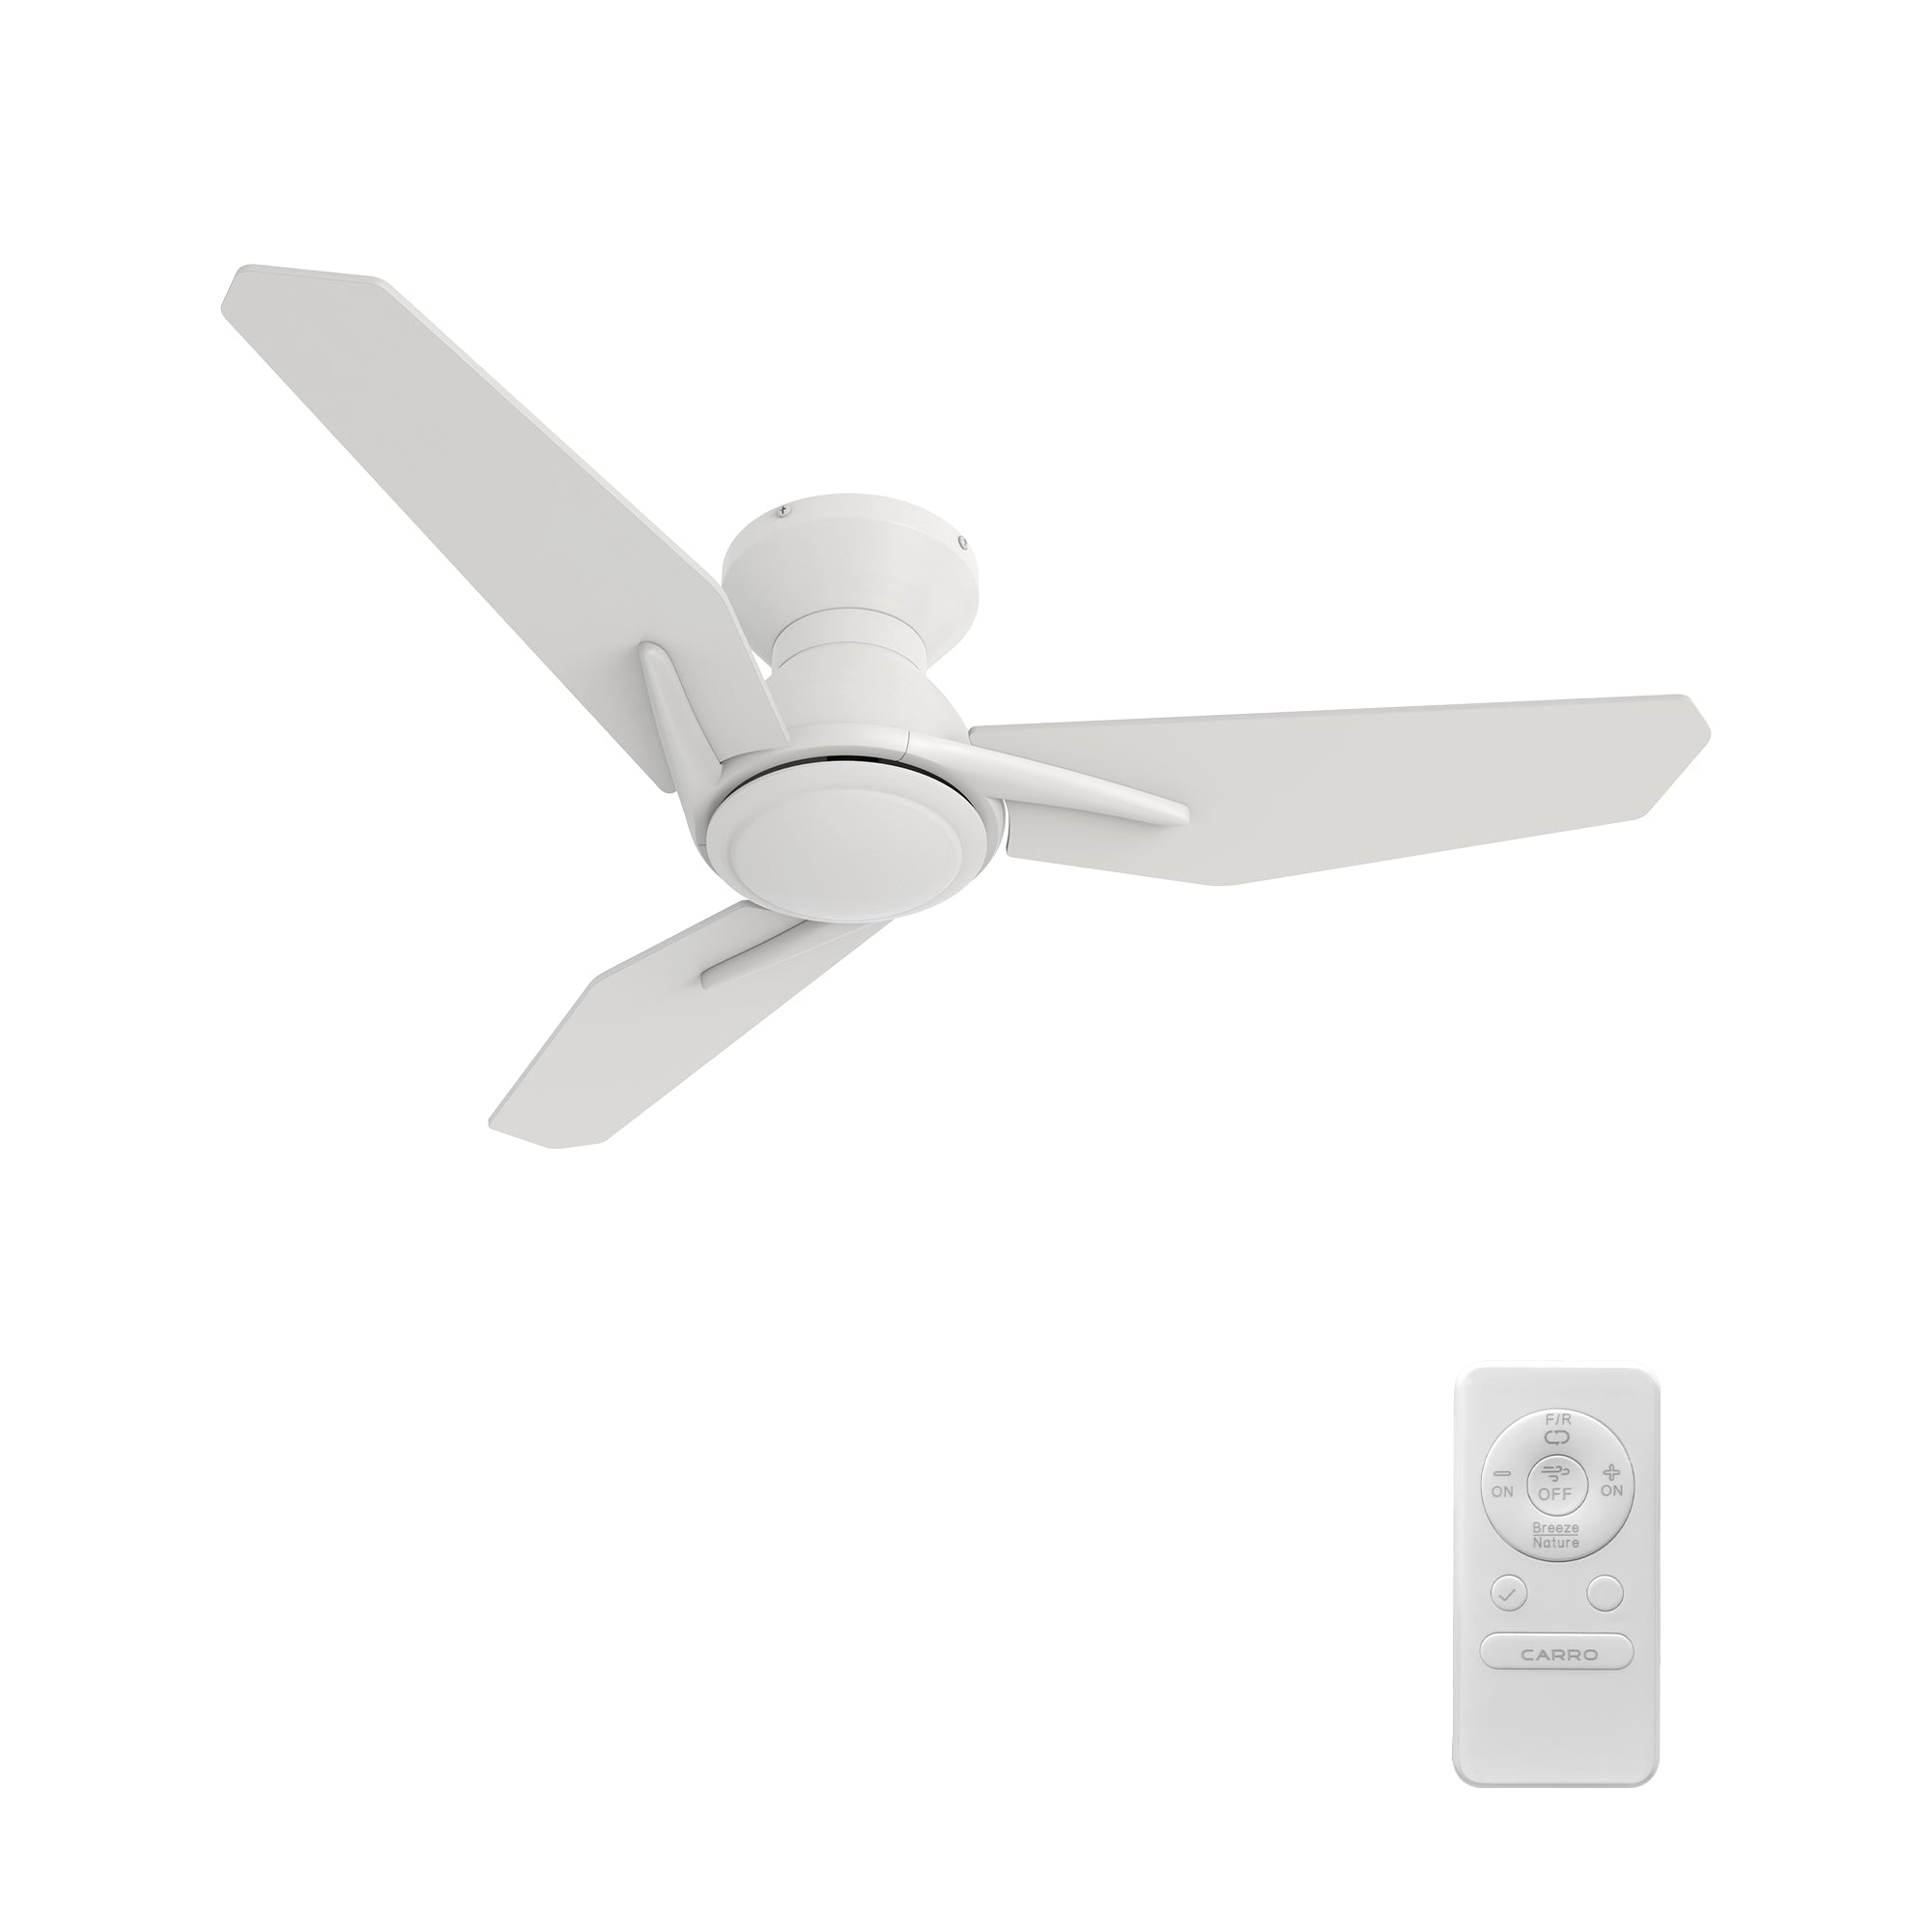 indoor Flush mount ceiling fan with remote, 3-plywood blades in white finish, modern stylish. Powered by a 10-speed DC motor and delivering a 2830 CFM airflow output, this contemporary ceiling fan provides you a refreshing breeze in summer. 